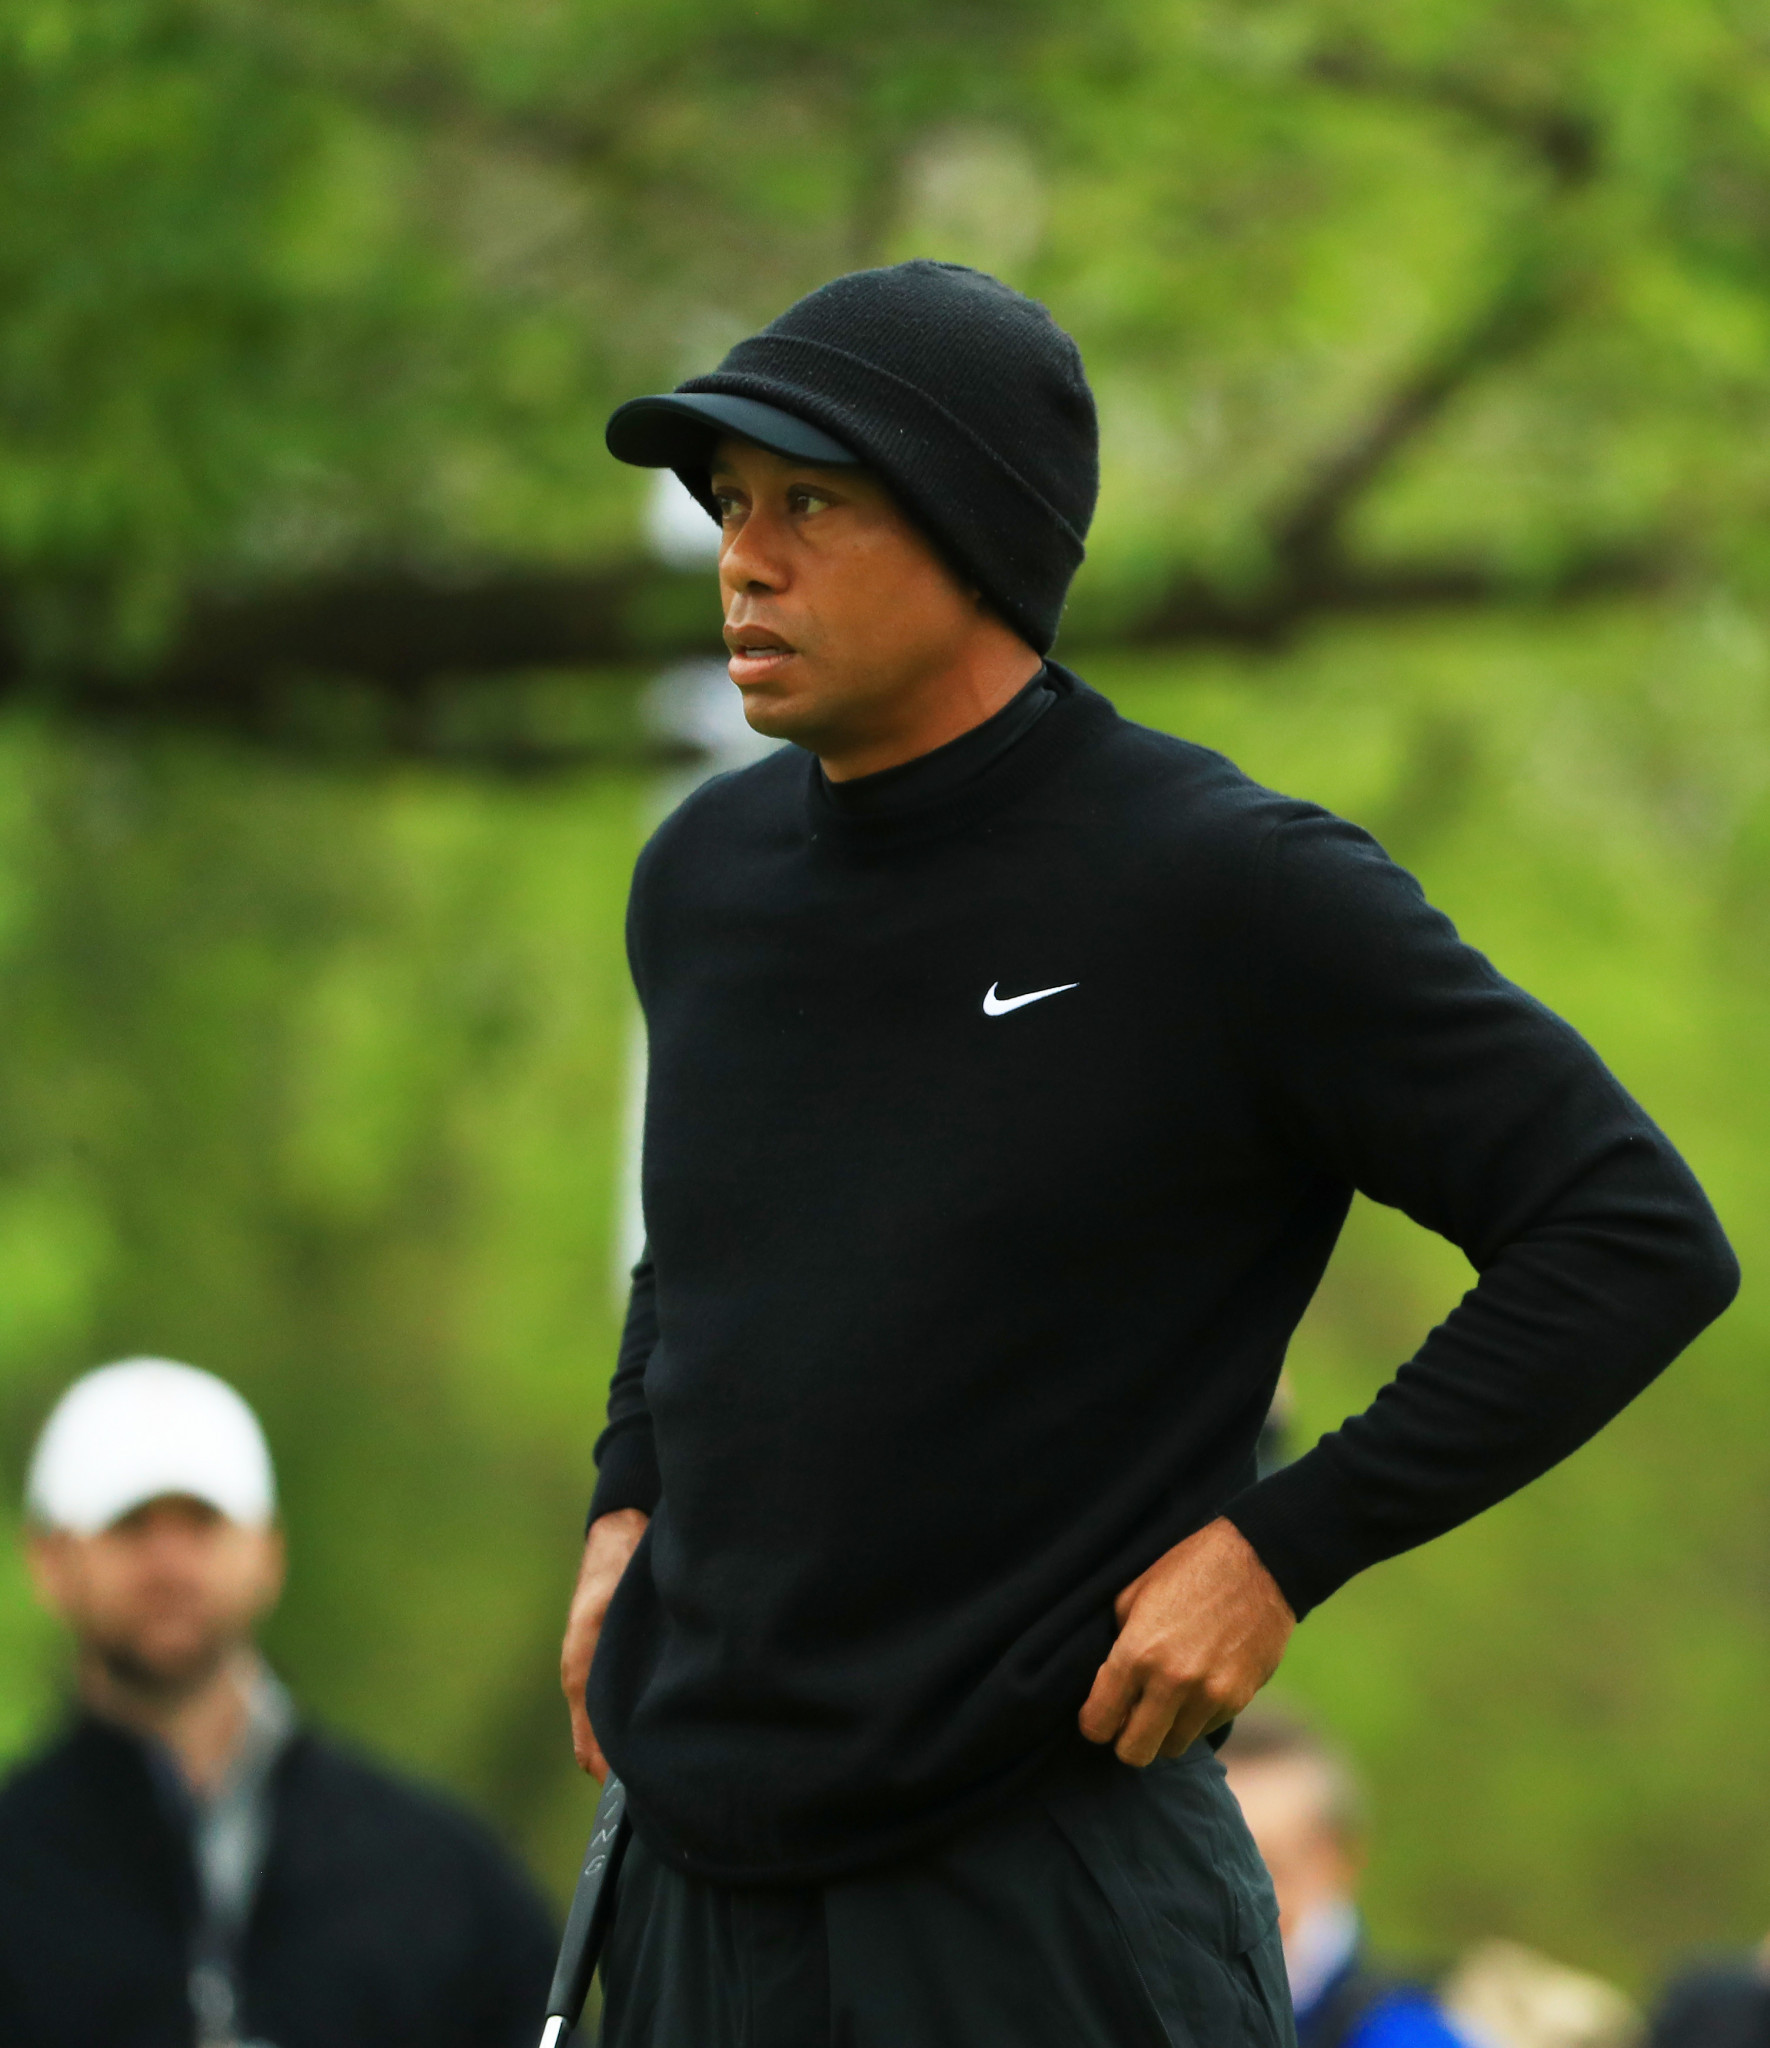 Tiger Woods is set to begin his bid for a record-equalling fifth US PGA Championship title ©Getty Images